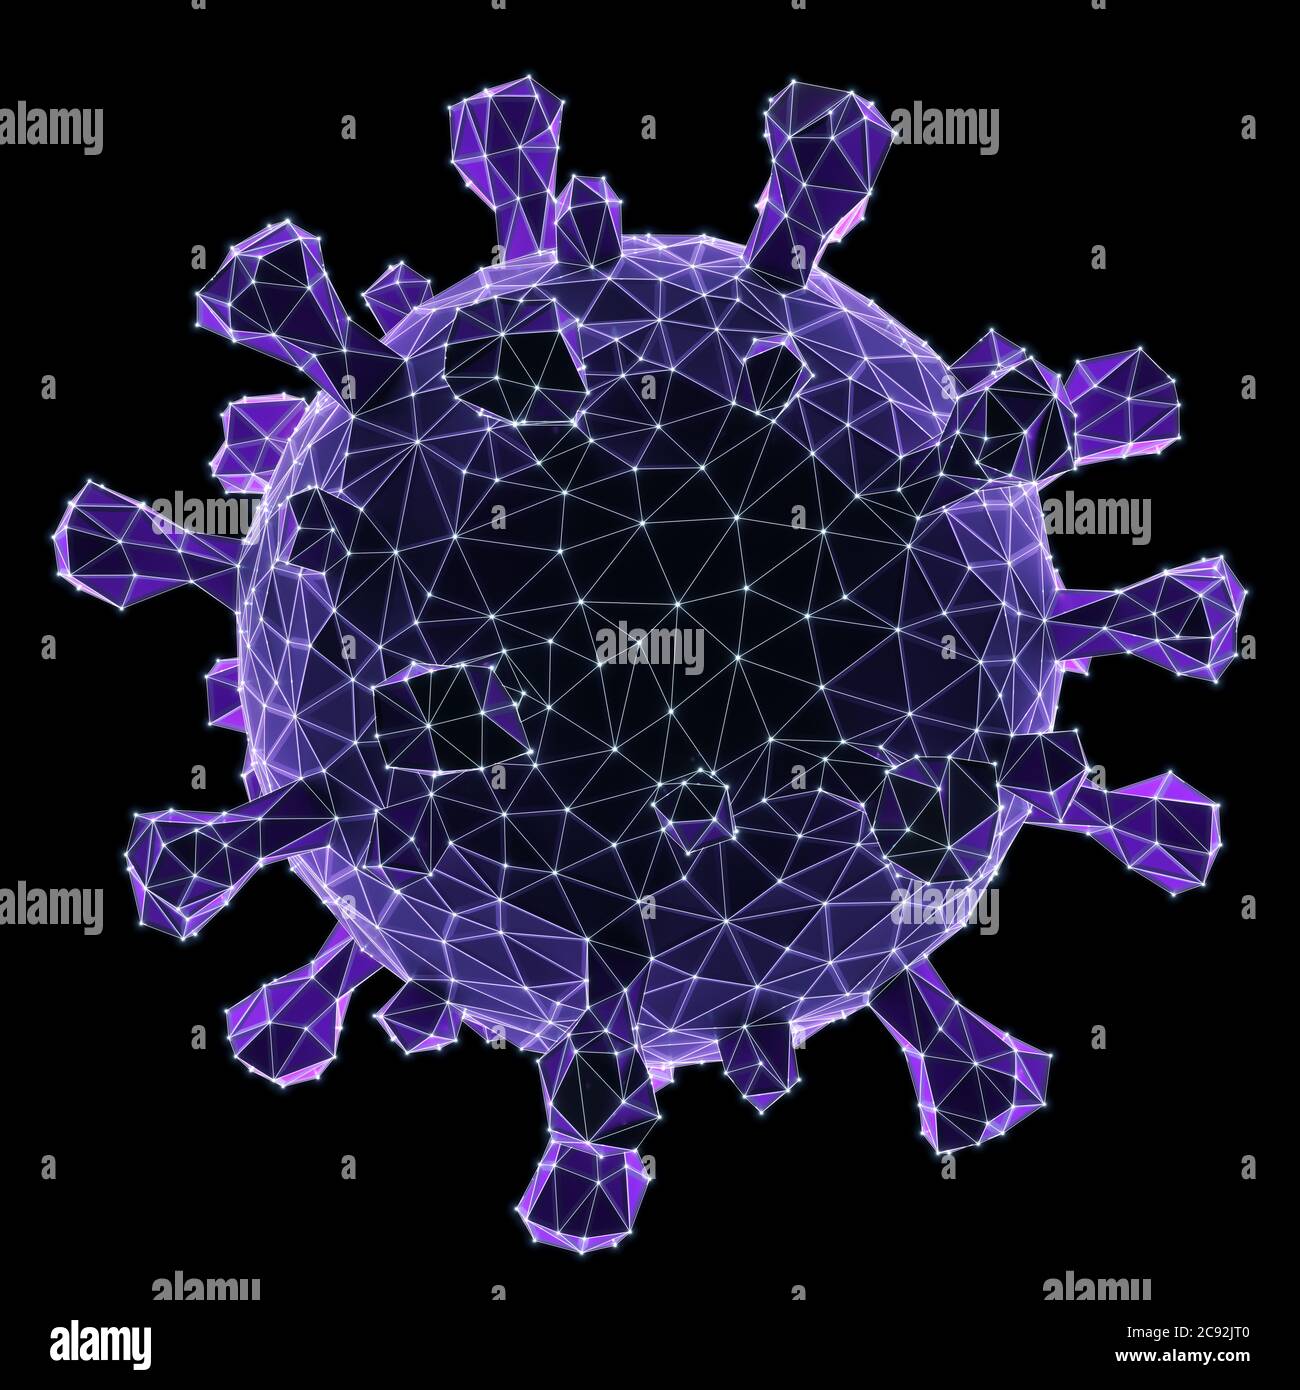 Covid-19, Coronavirus, 3D illustration polygonal conceptual structure. Clipping path included. Stock Photo